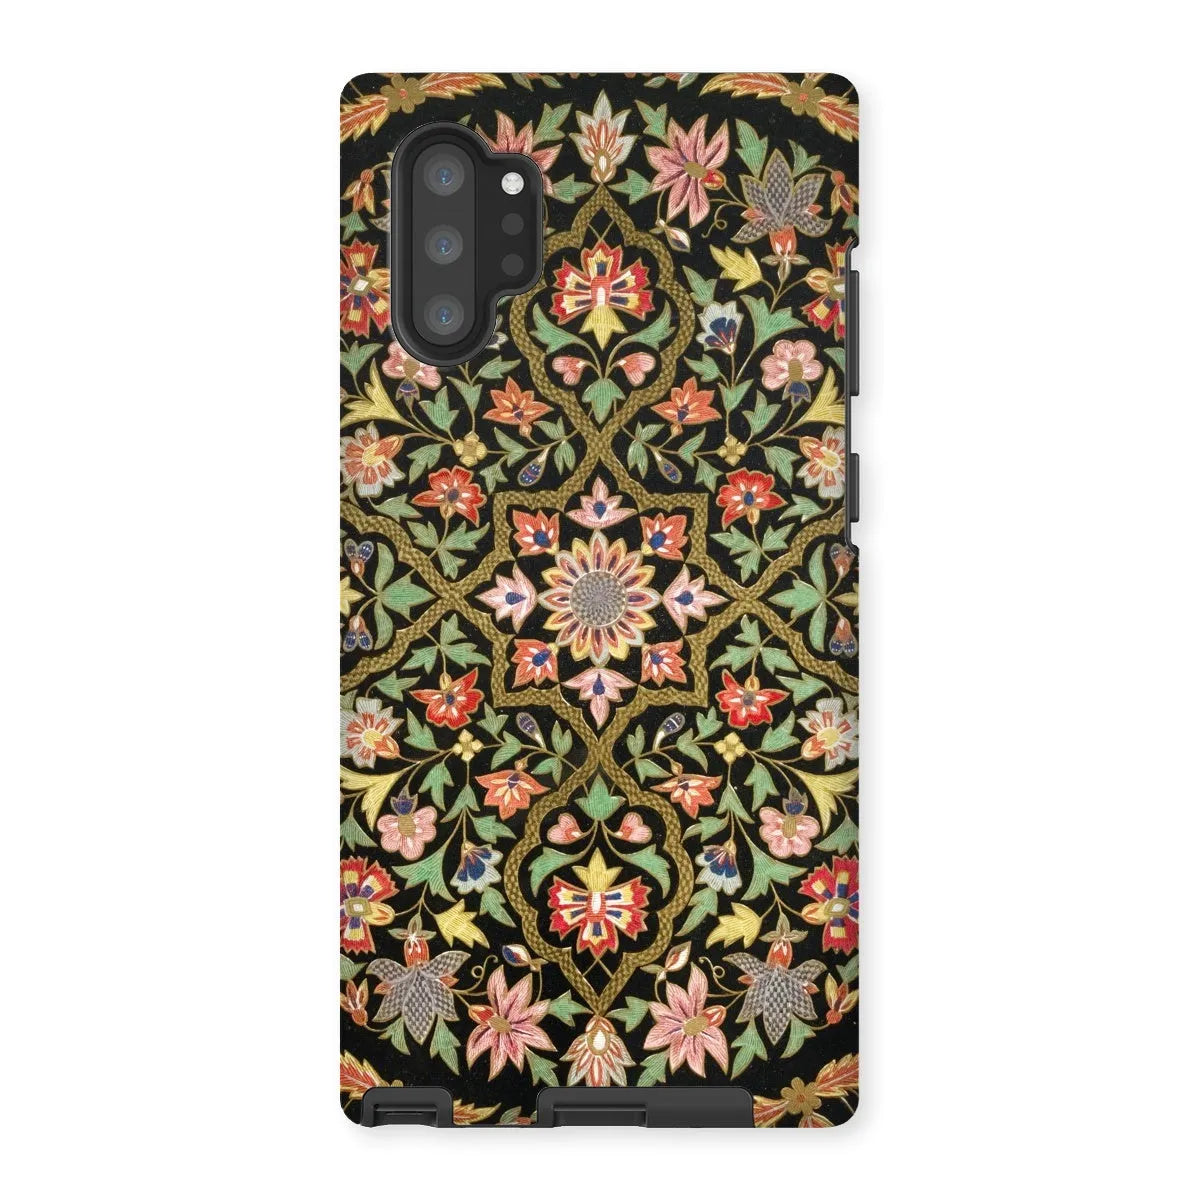 Indian Embroidery - Aesthetic Pattern Art Phone Case - Samsung Galaxy Note 10p / Matte - Mobile Phone Cases - Aesthetic